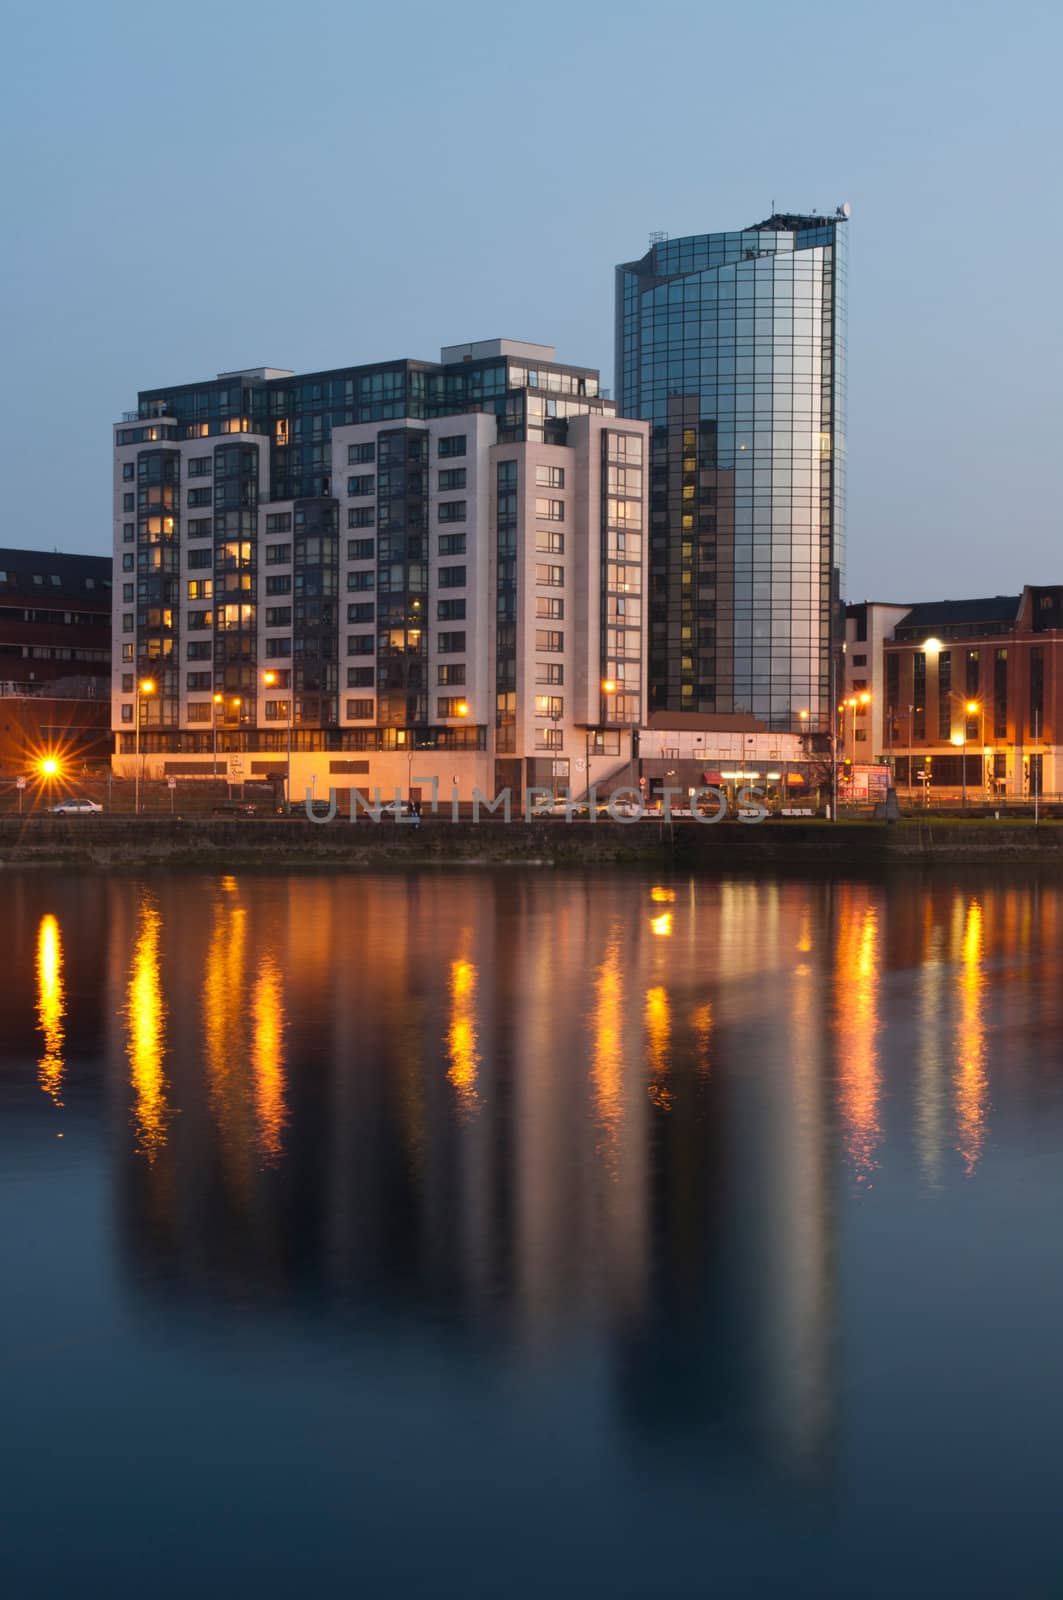 stunning nightscene with Riverpoint buildings over Shannon river in Limerick, Ireland (picture taken after sunset)